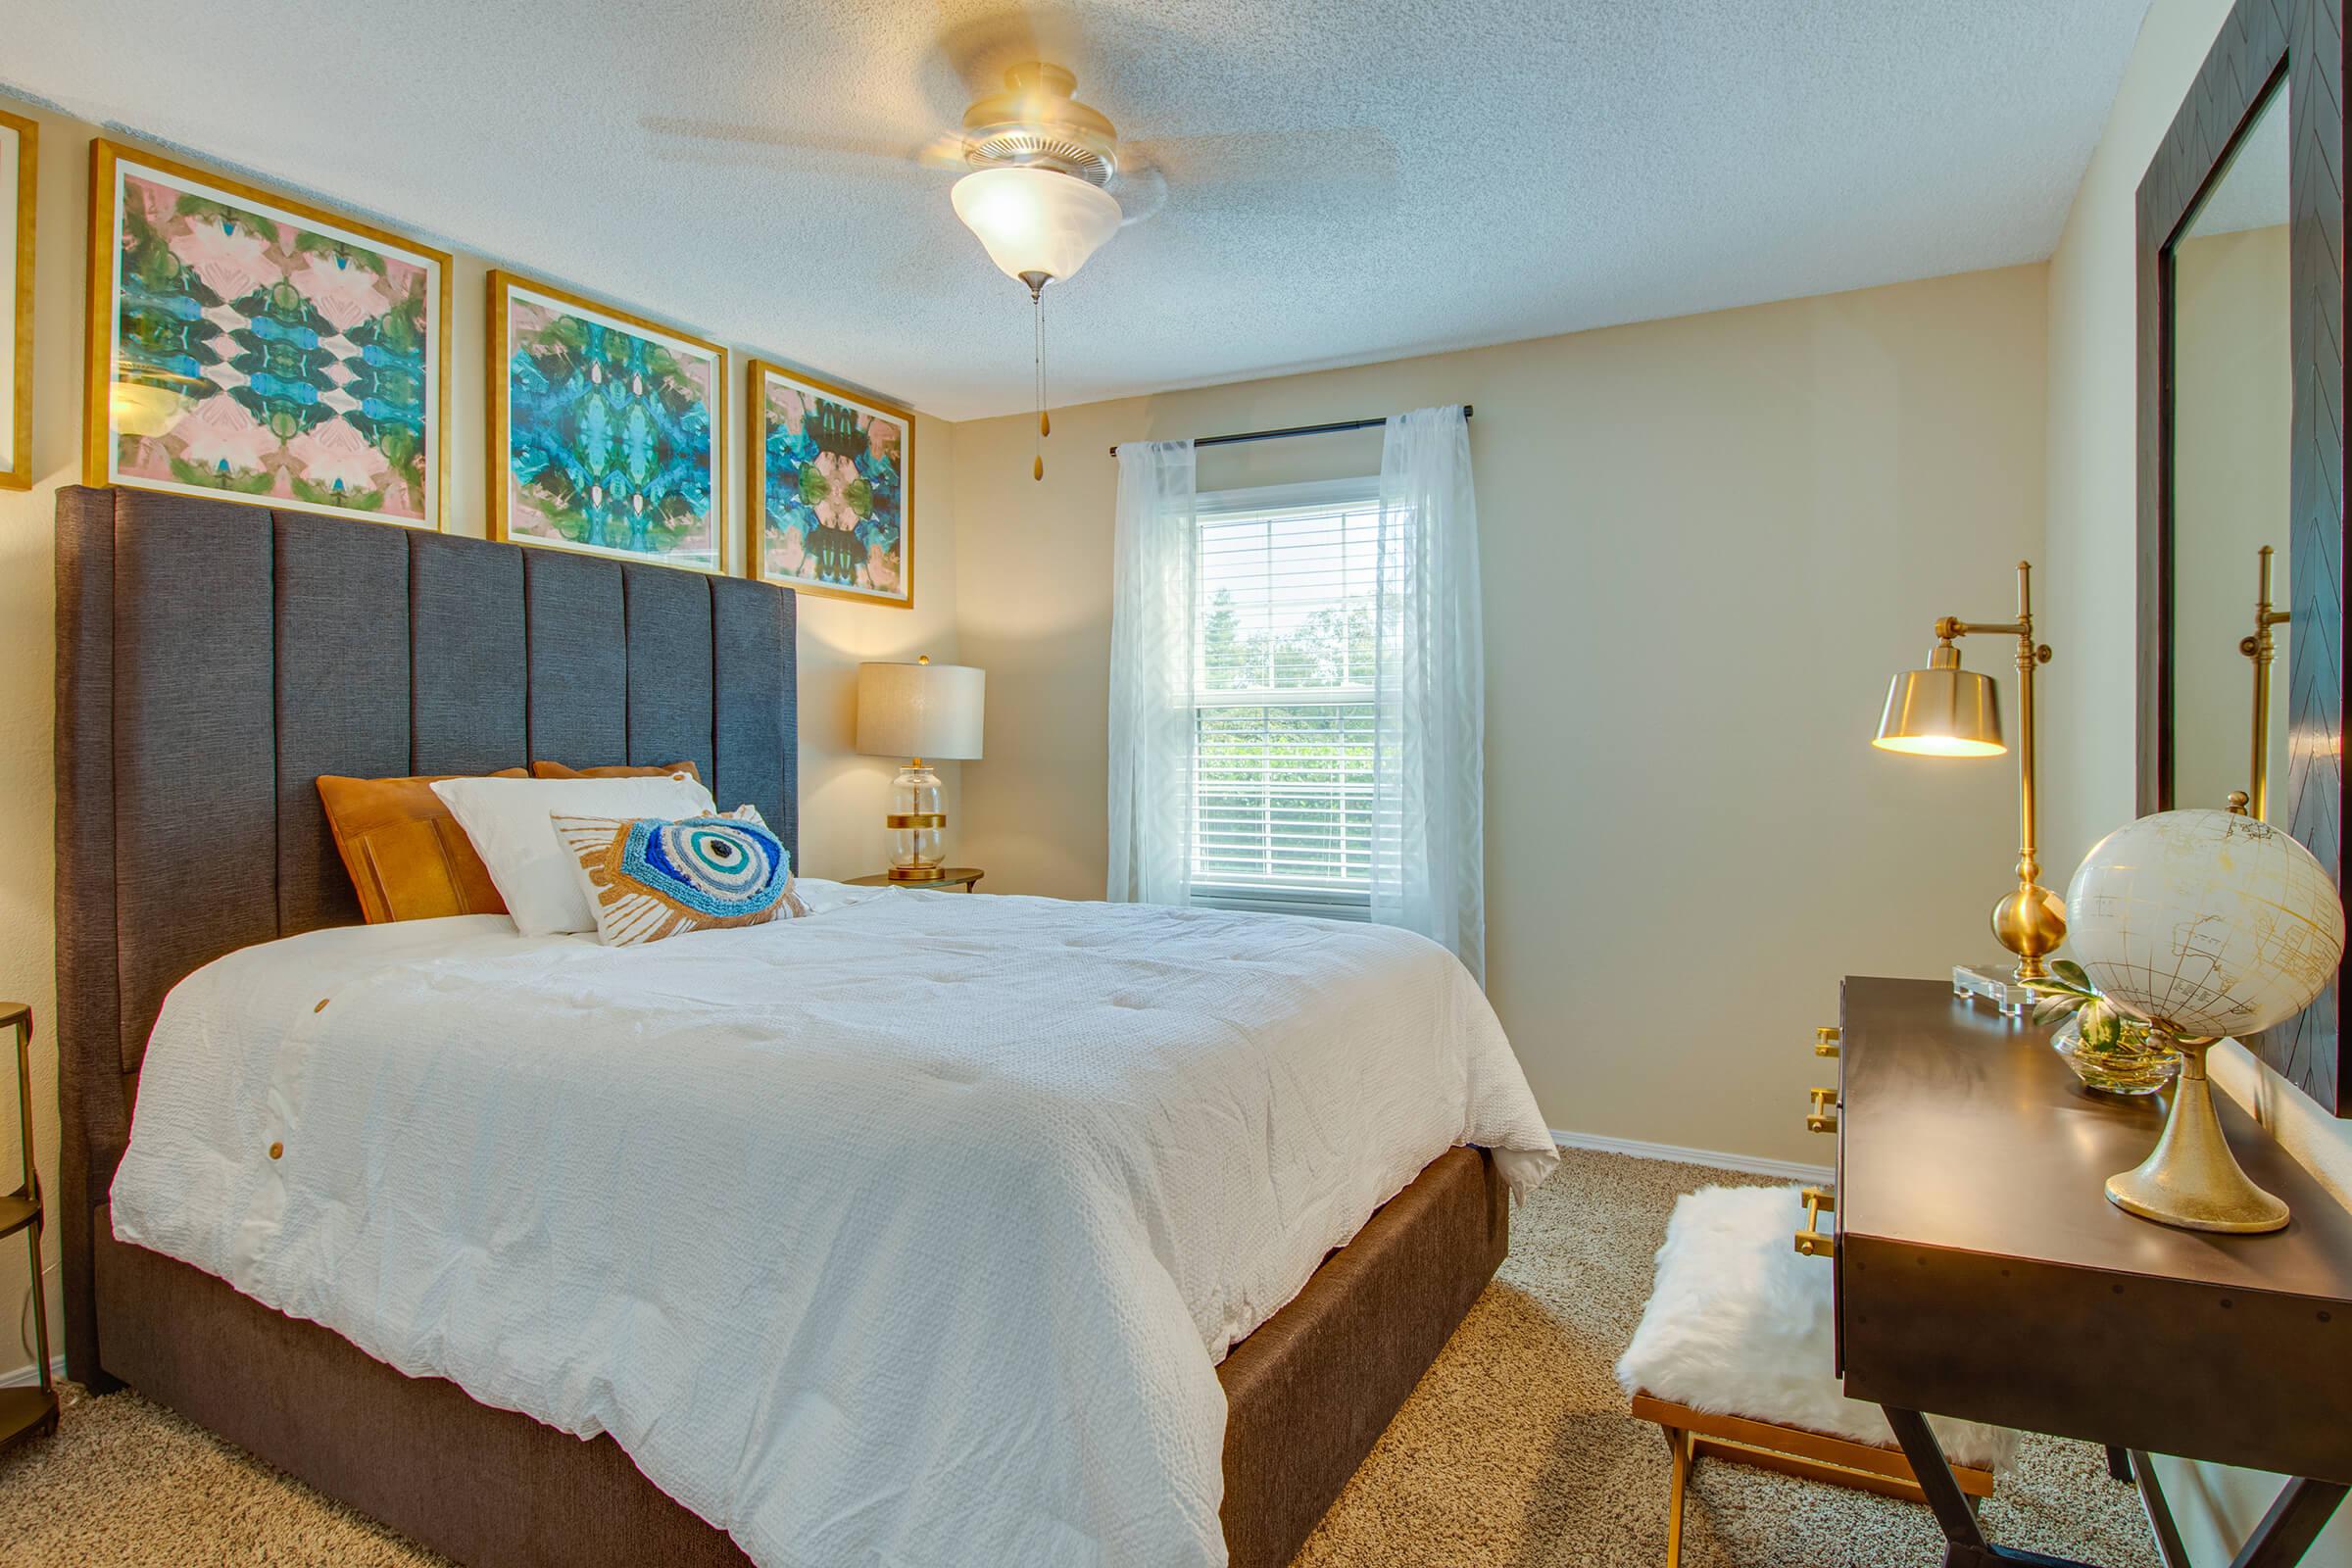 One and Two Bedroom Apartments For Rent in Franklin, TN